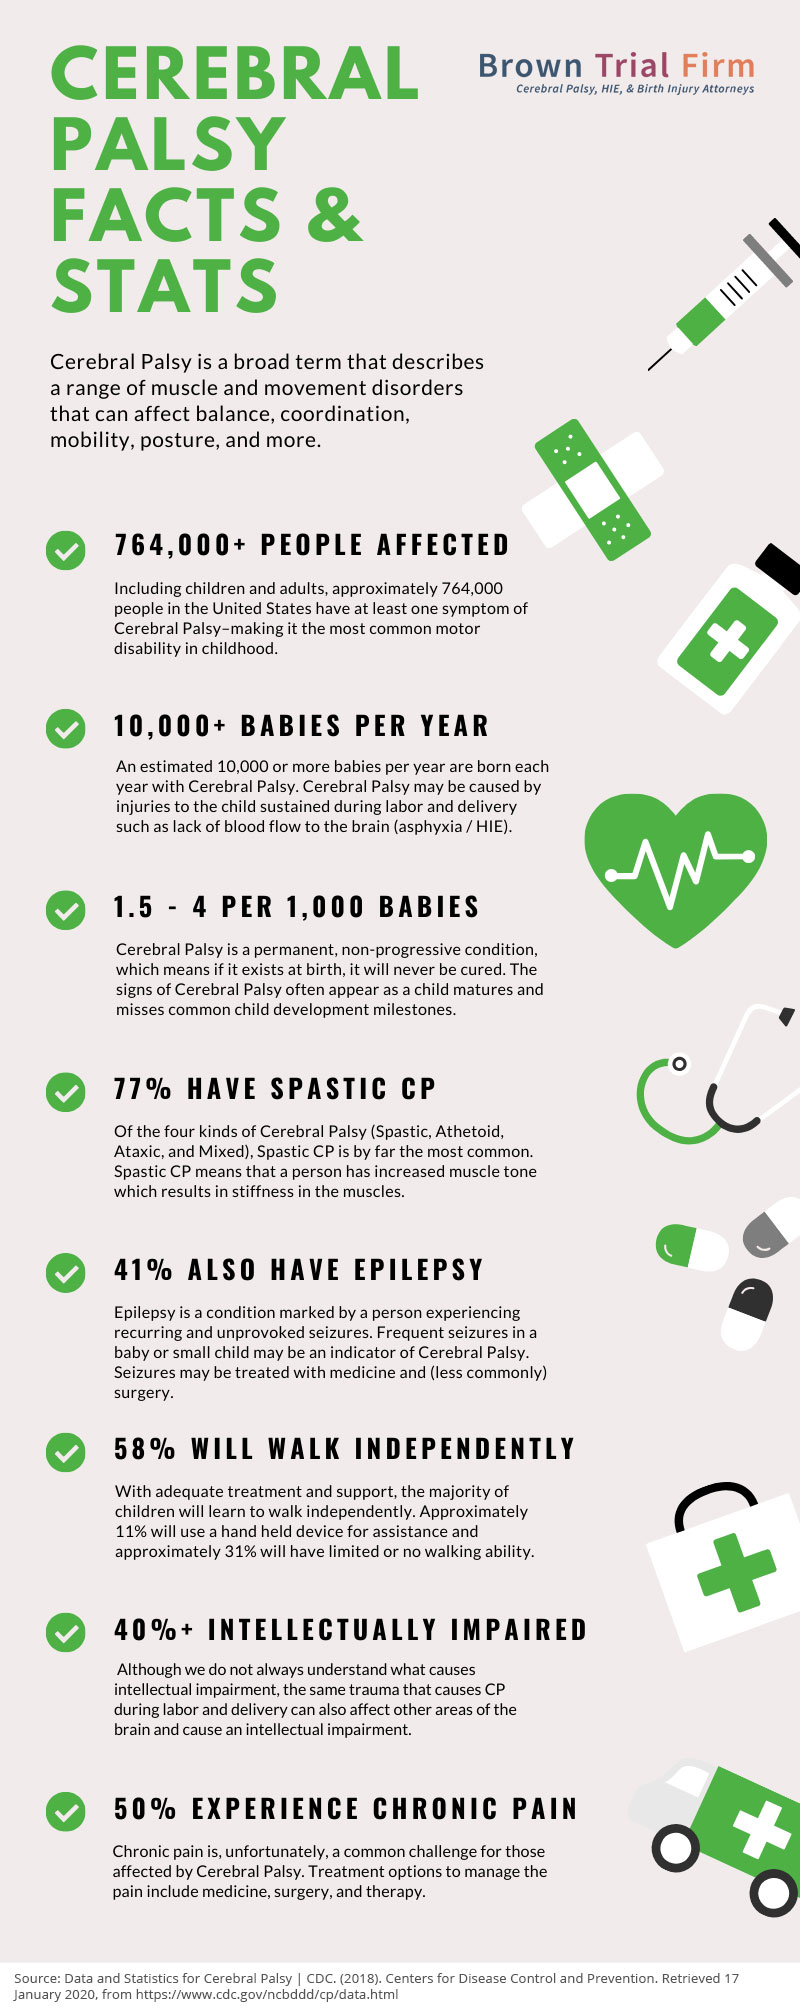 Cerebral Palsy Facts and Stats infographic